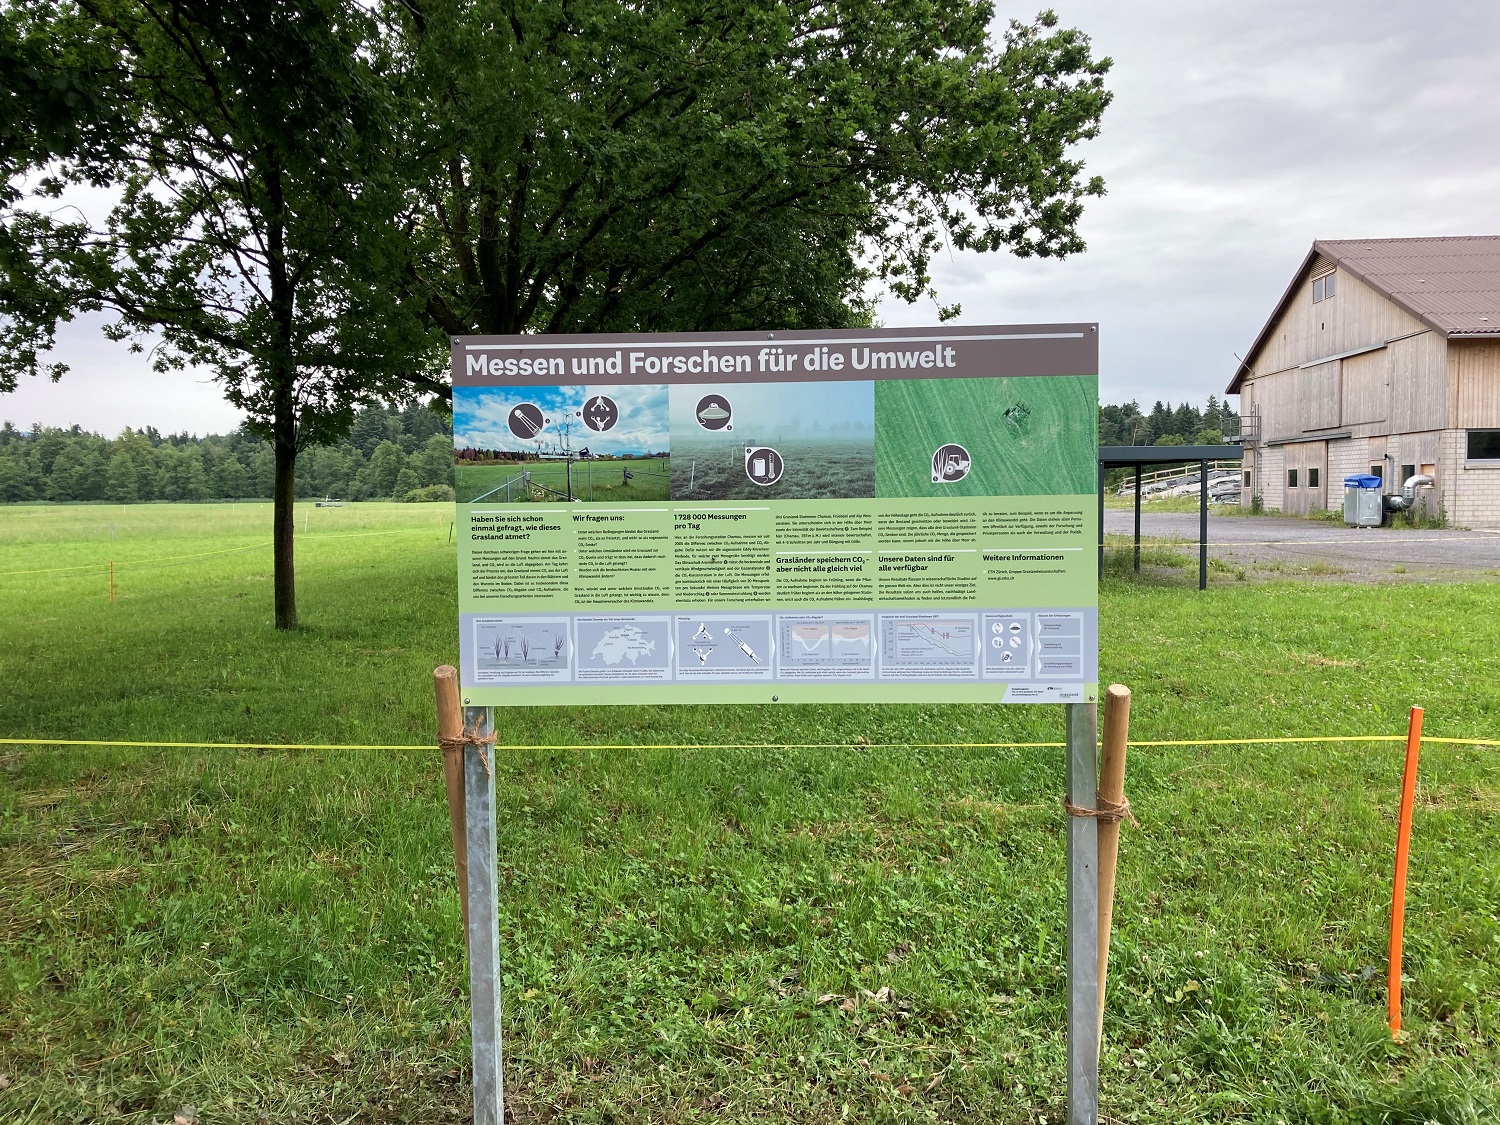 Enlarged view: Infoboard installed at farm/research site.